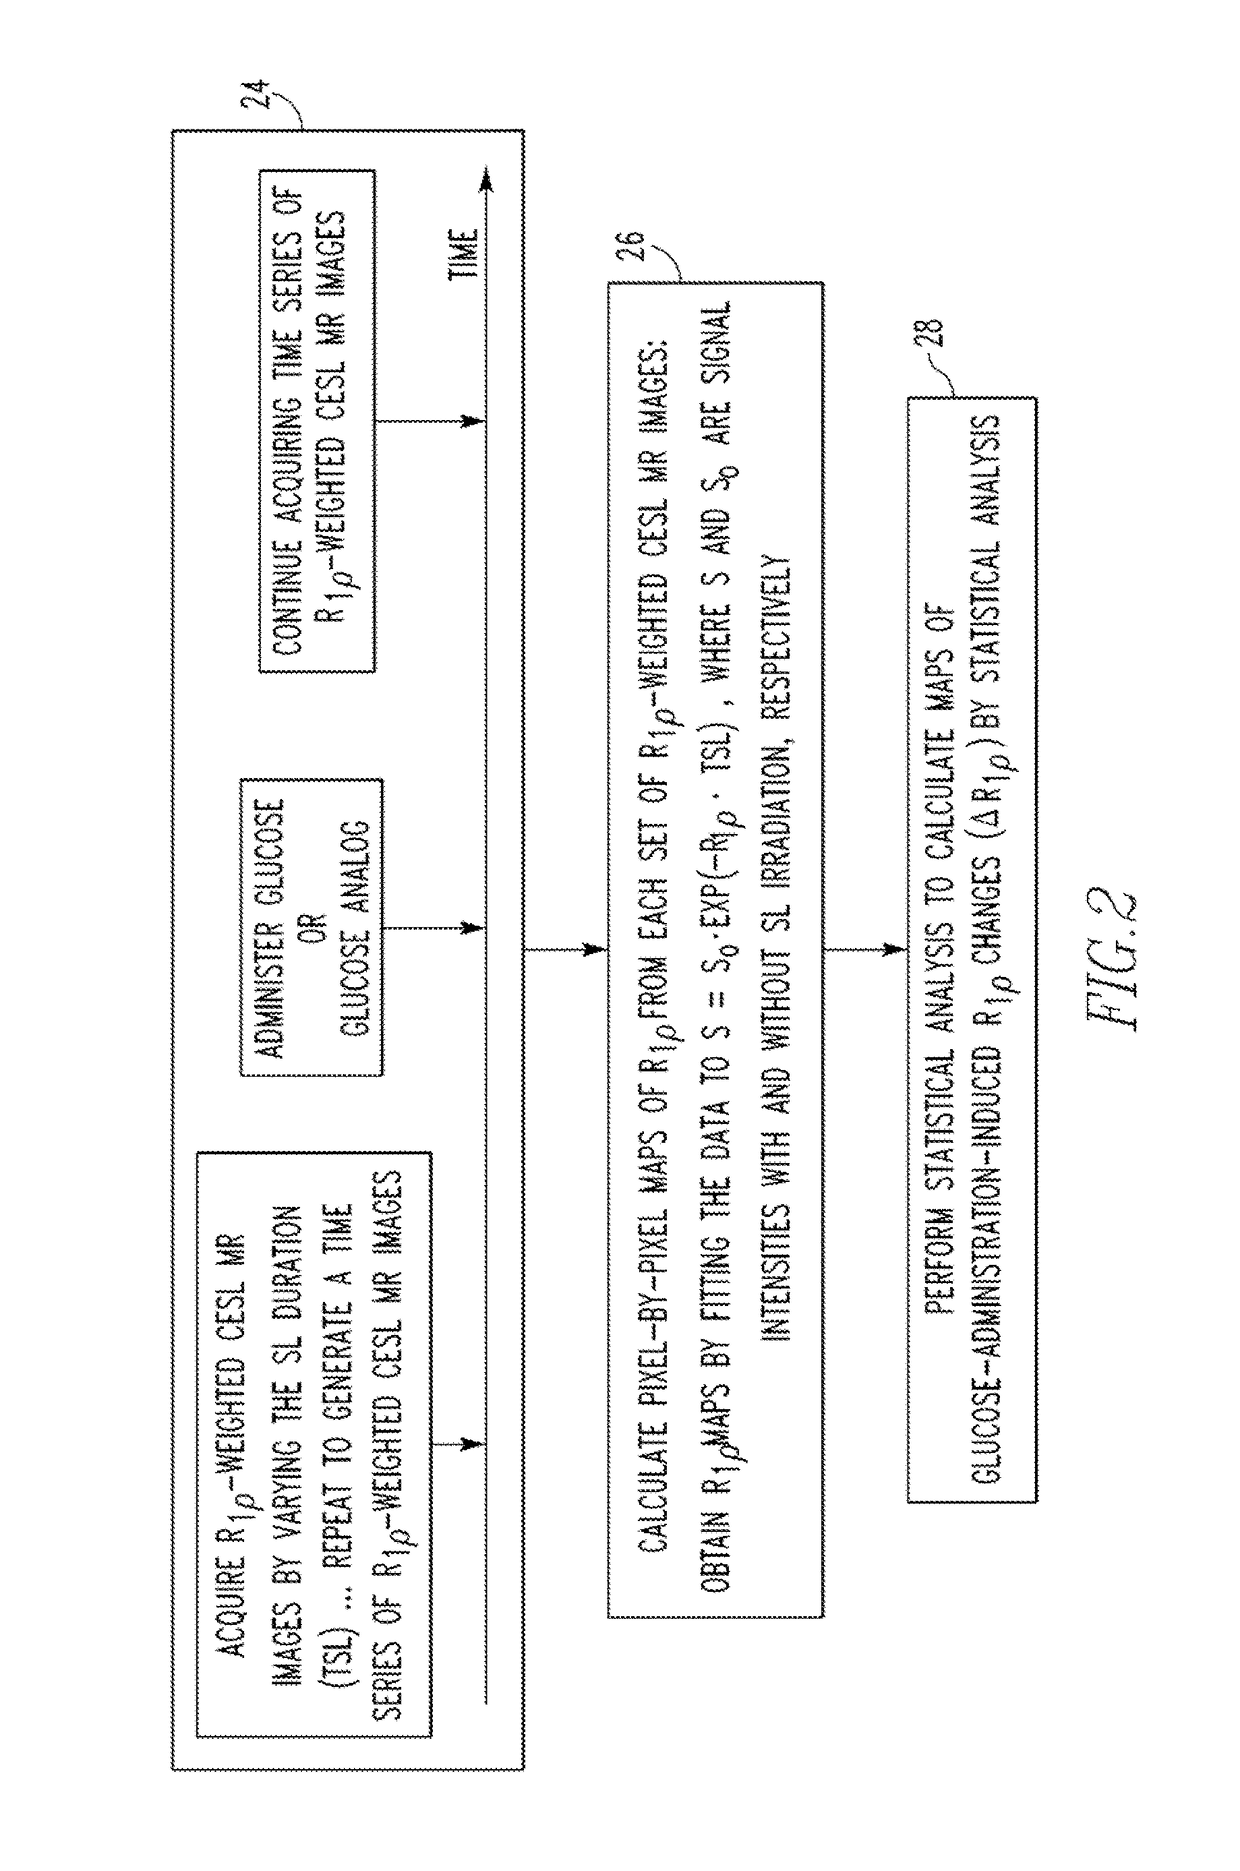 Method and system for monitoring glucose transport and metabolism by spin-lock magnetic resonance